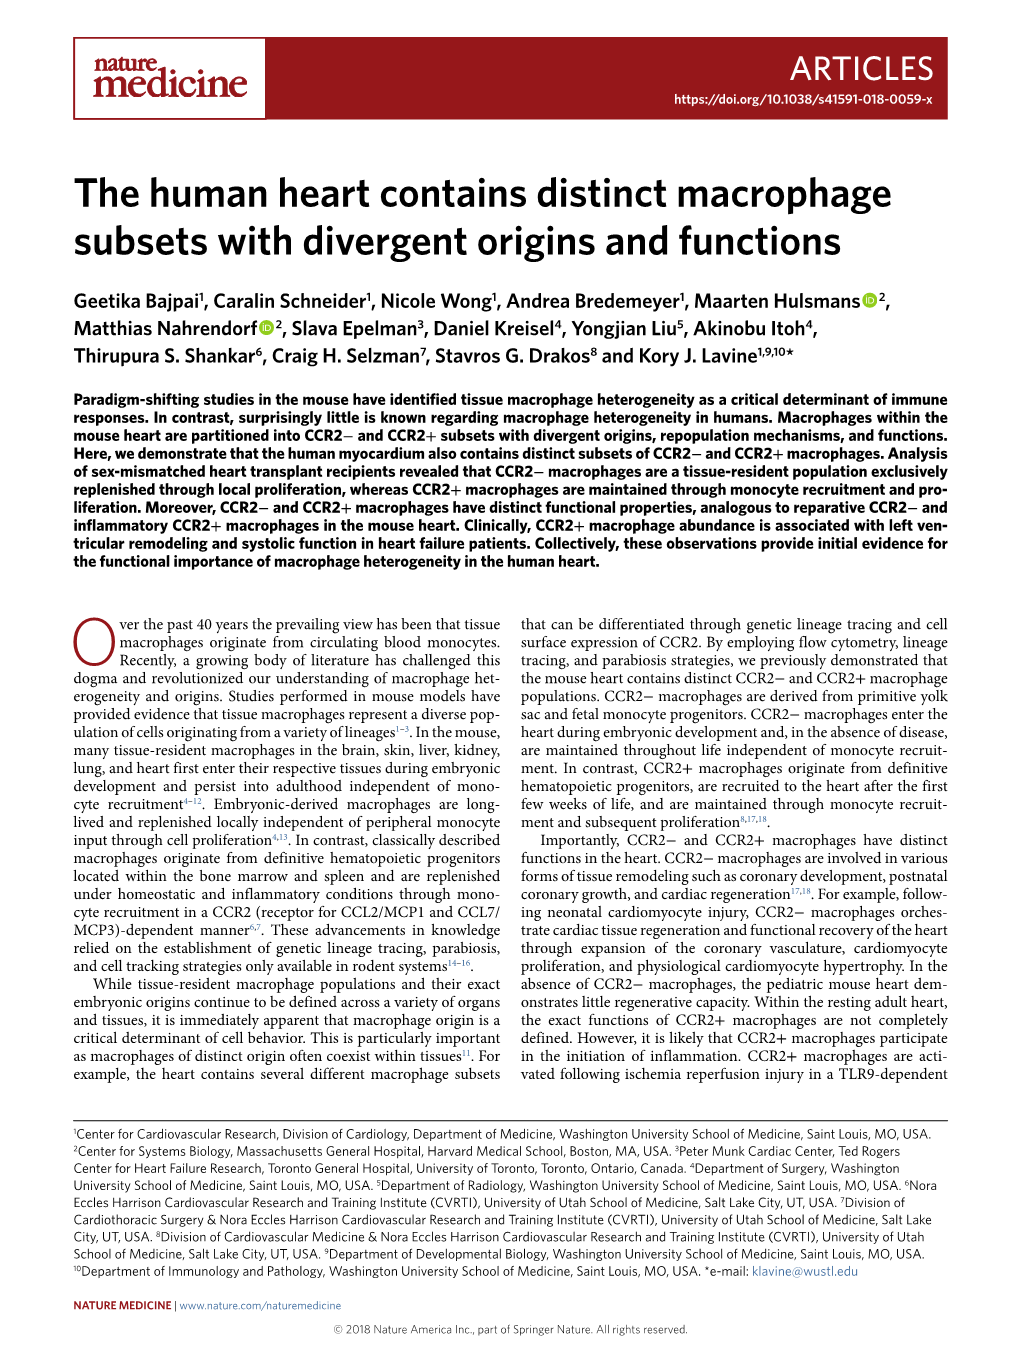 The Human Heart Contains Distinct Macrophage Subsets with Divergent Origins and Functions